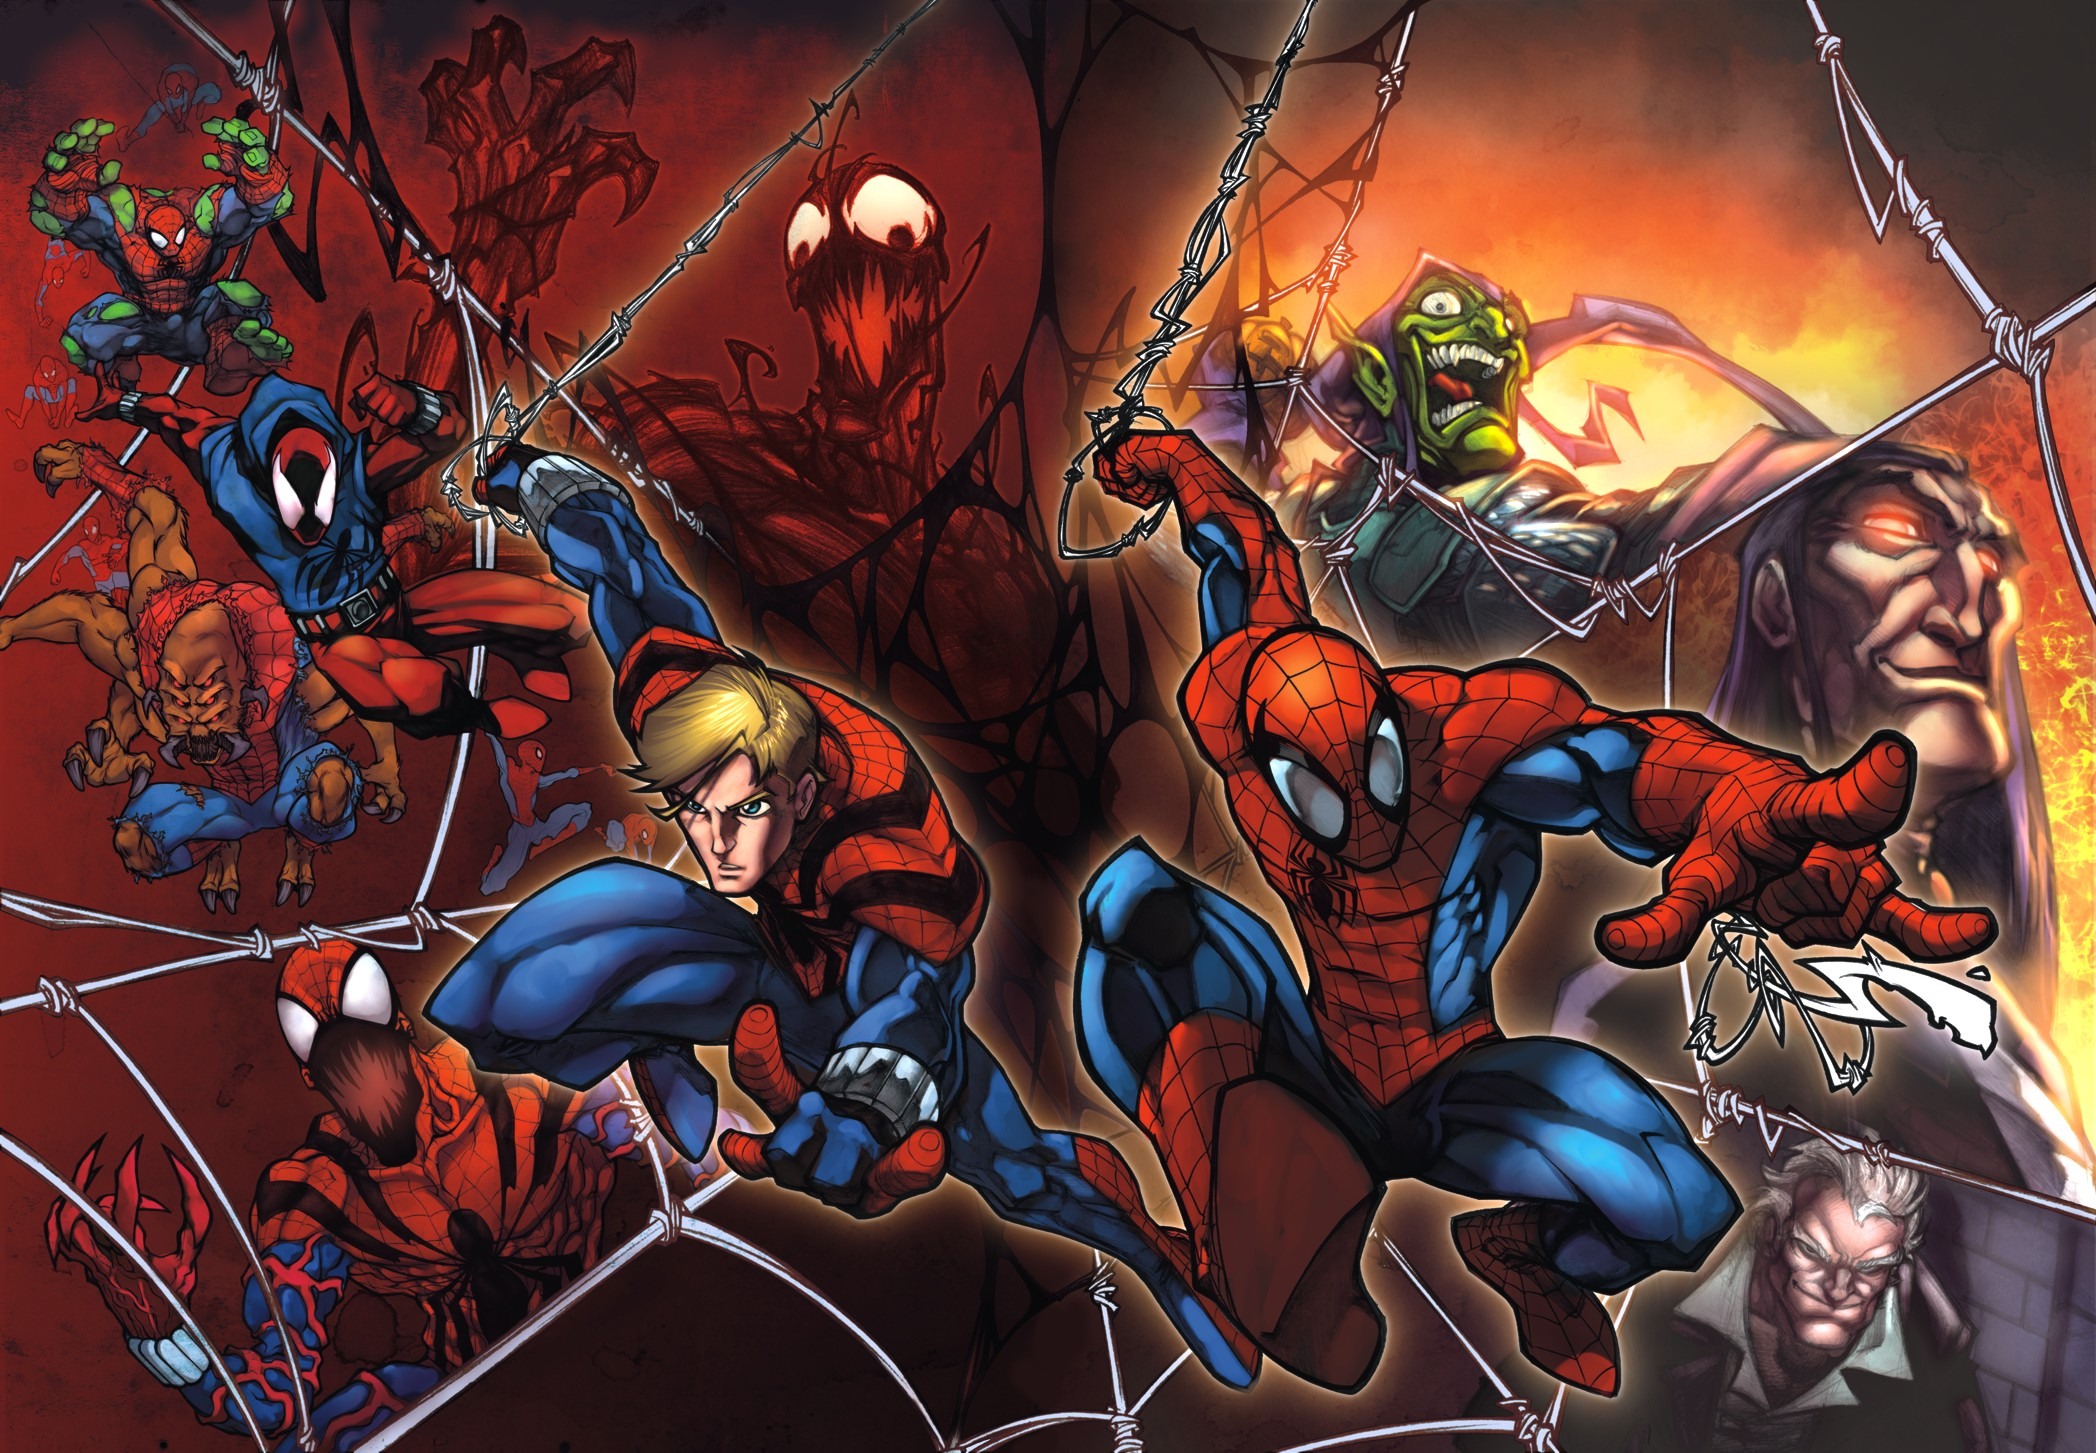 An awesome image of Spiderman comicwallpapers10net